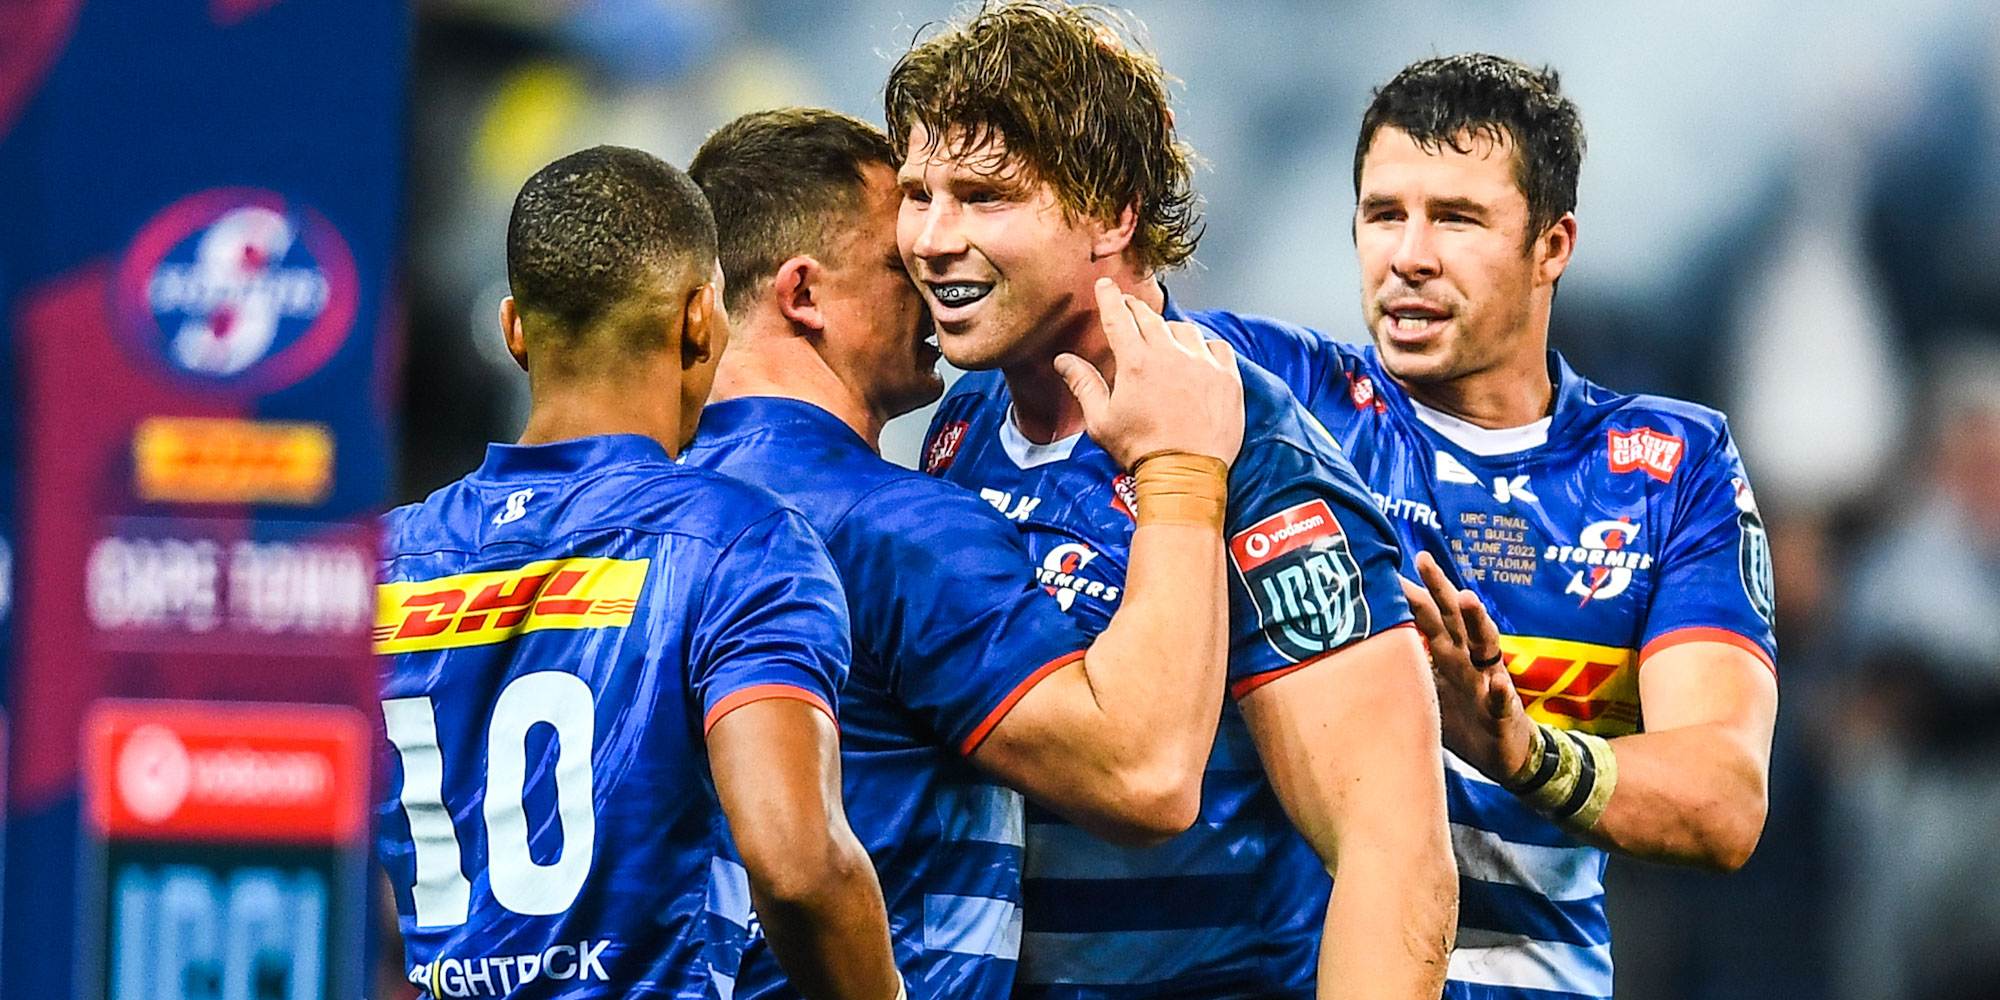 Vodacom United Rugby Championship Player of the Season (announced last year): Evan Roos (DHL Stormers)